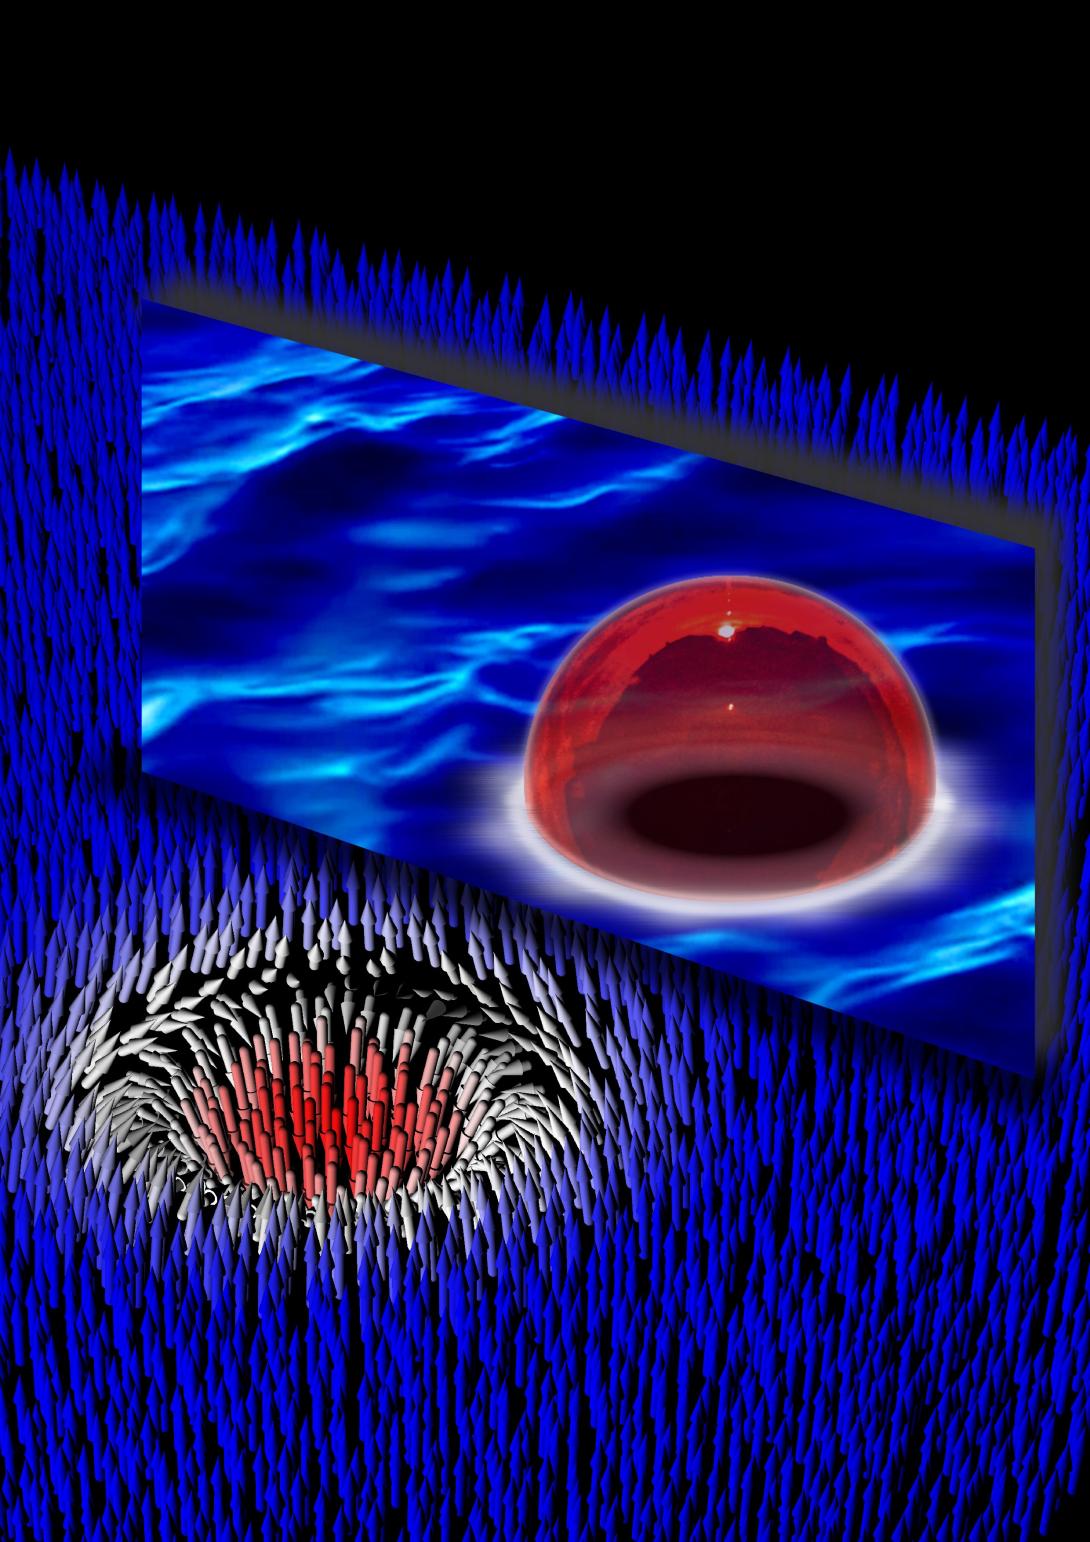 Ultracold sodium atoms, prepared in a false vacuum state (blue), decay to the true vacuum (red) through the formation of bubbles".